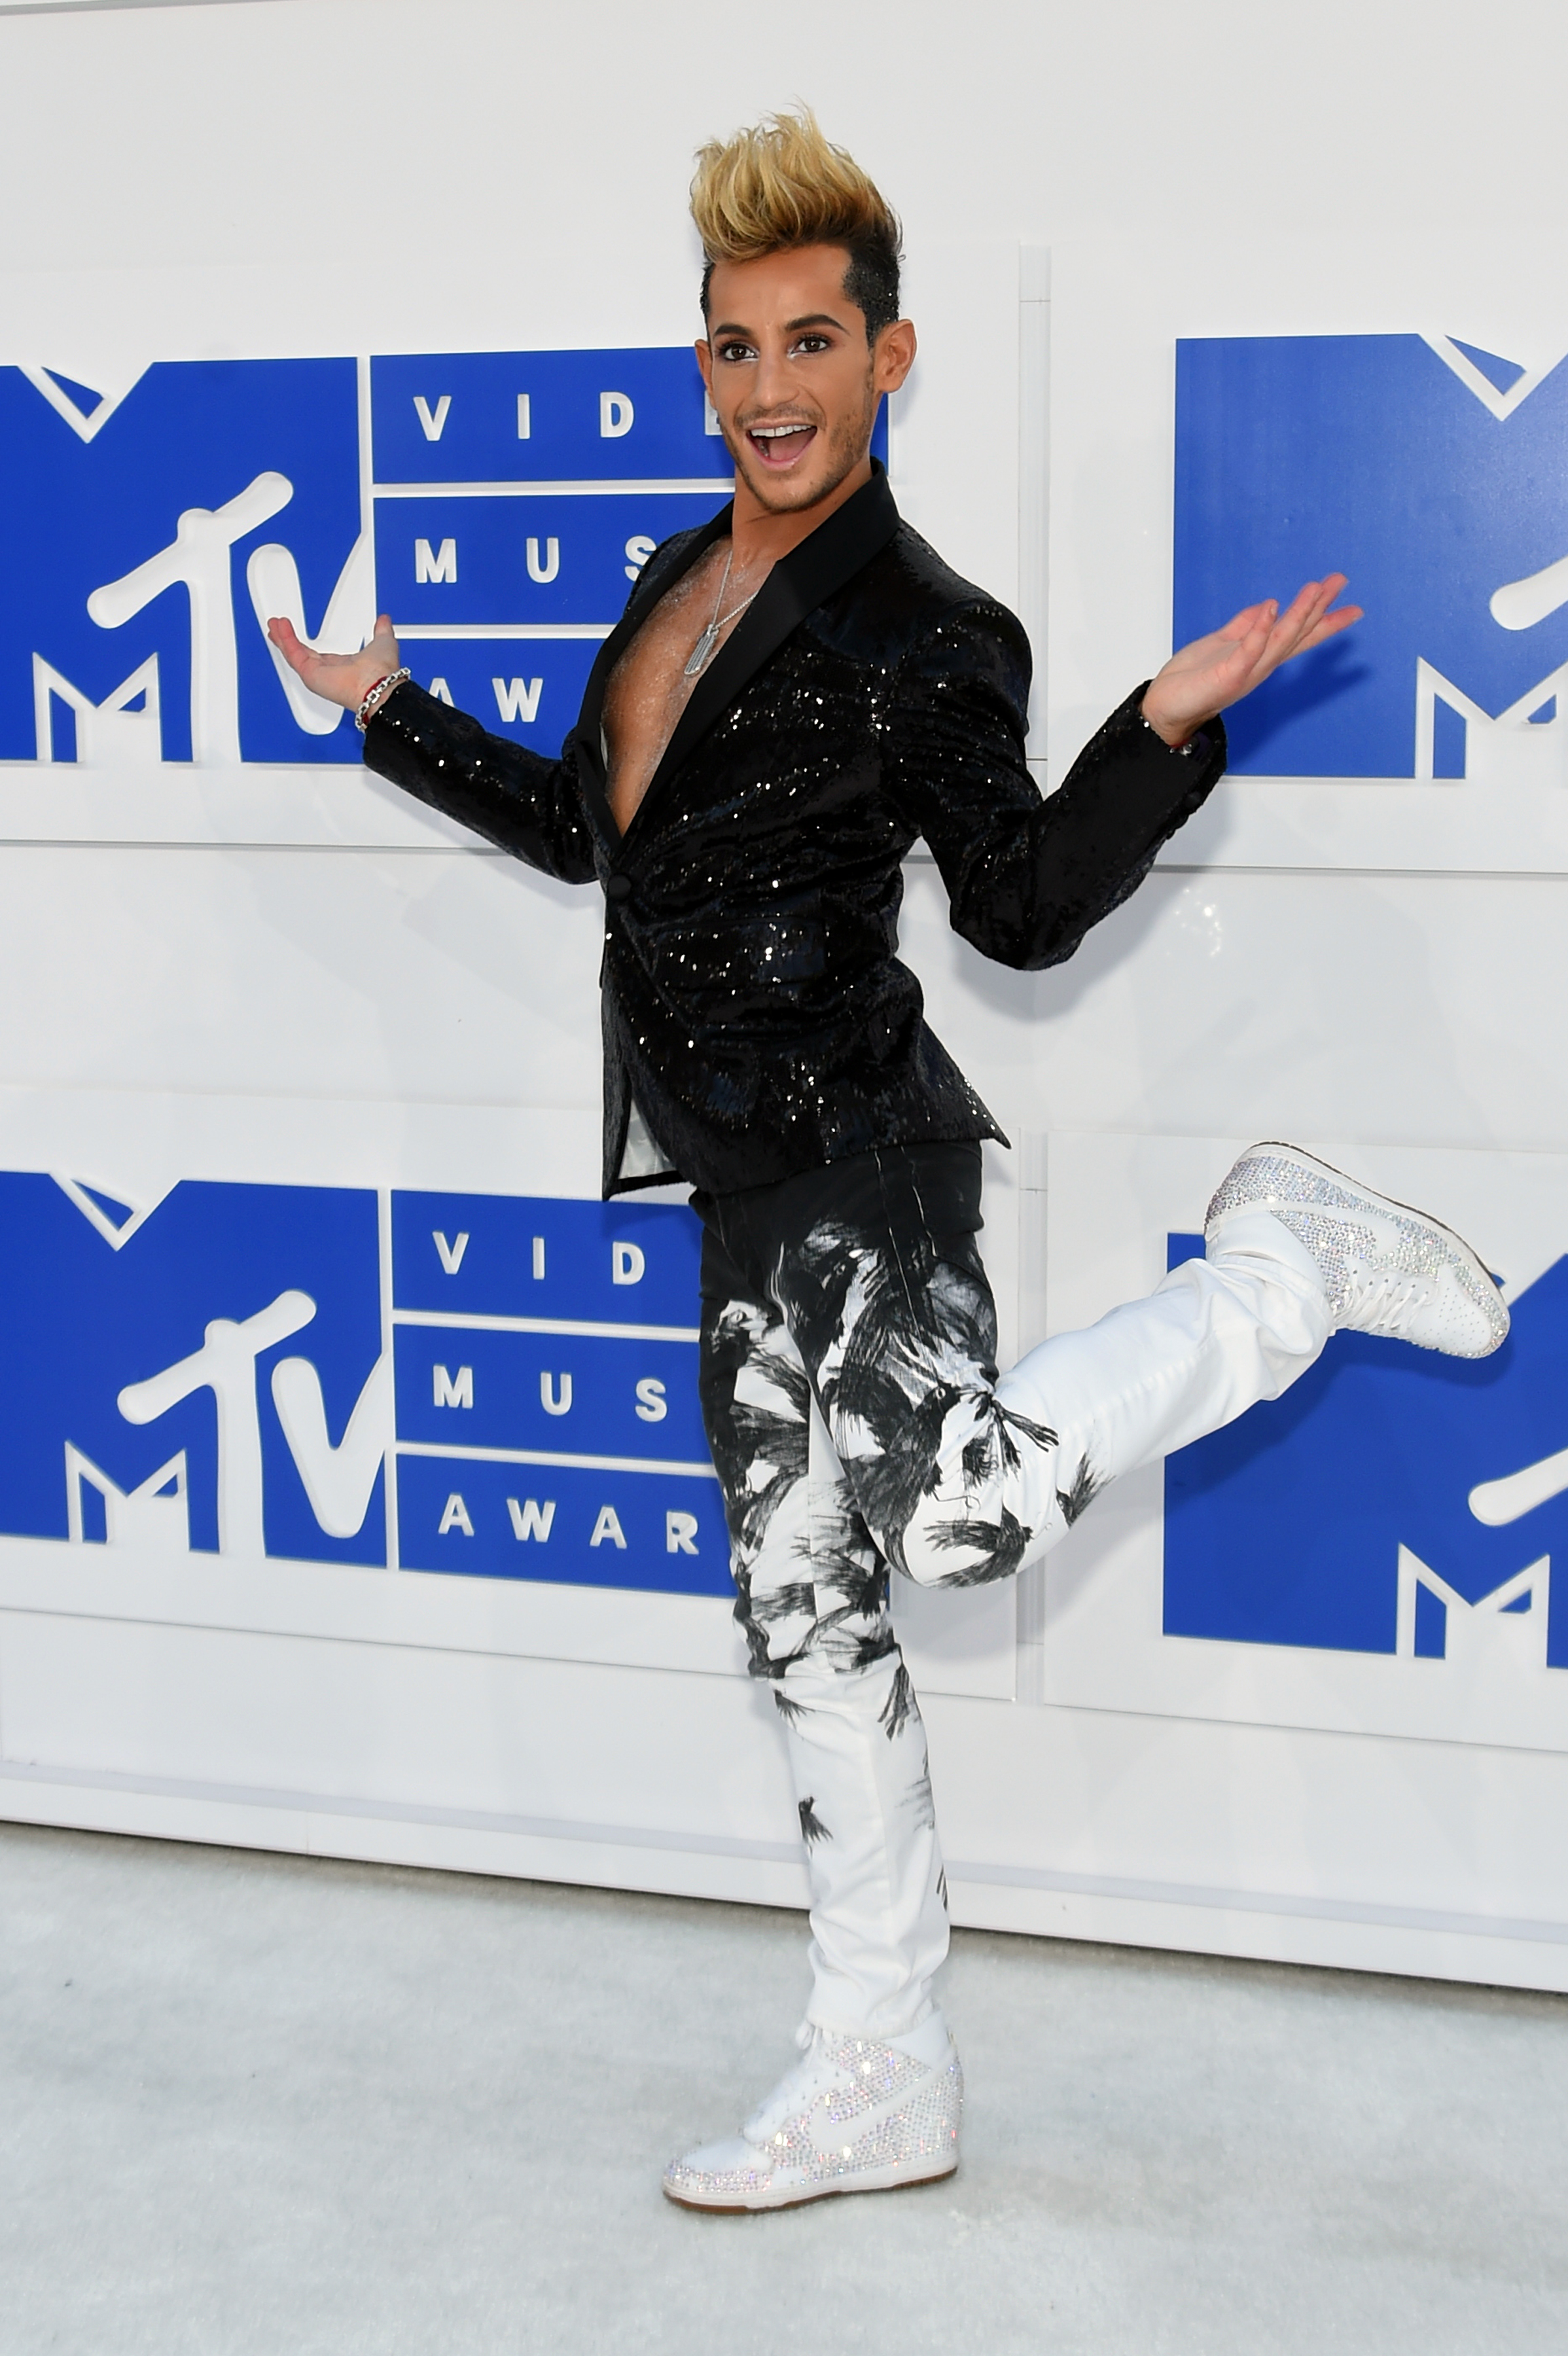 NEW YORK, NY - AUGUST 28: Frankie Grande attends the 2016 MTV Video Music Awards at Madison Square Garden on August 28, 2016 in New York City. Jamie McCarthy/Getty Images/AFP